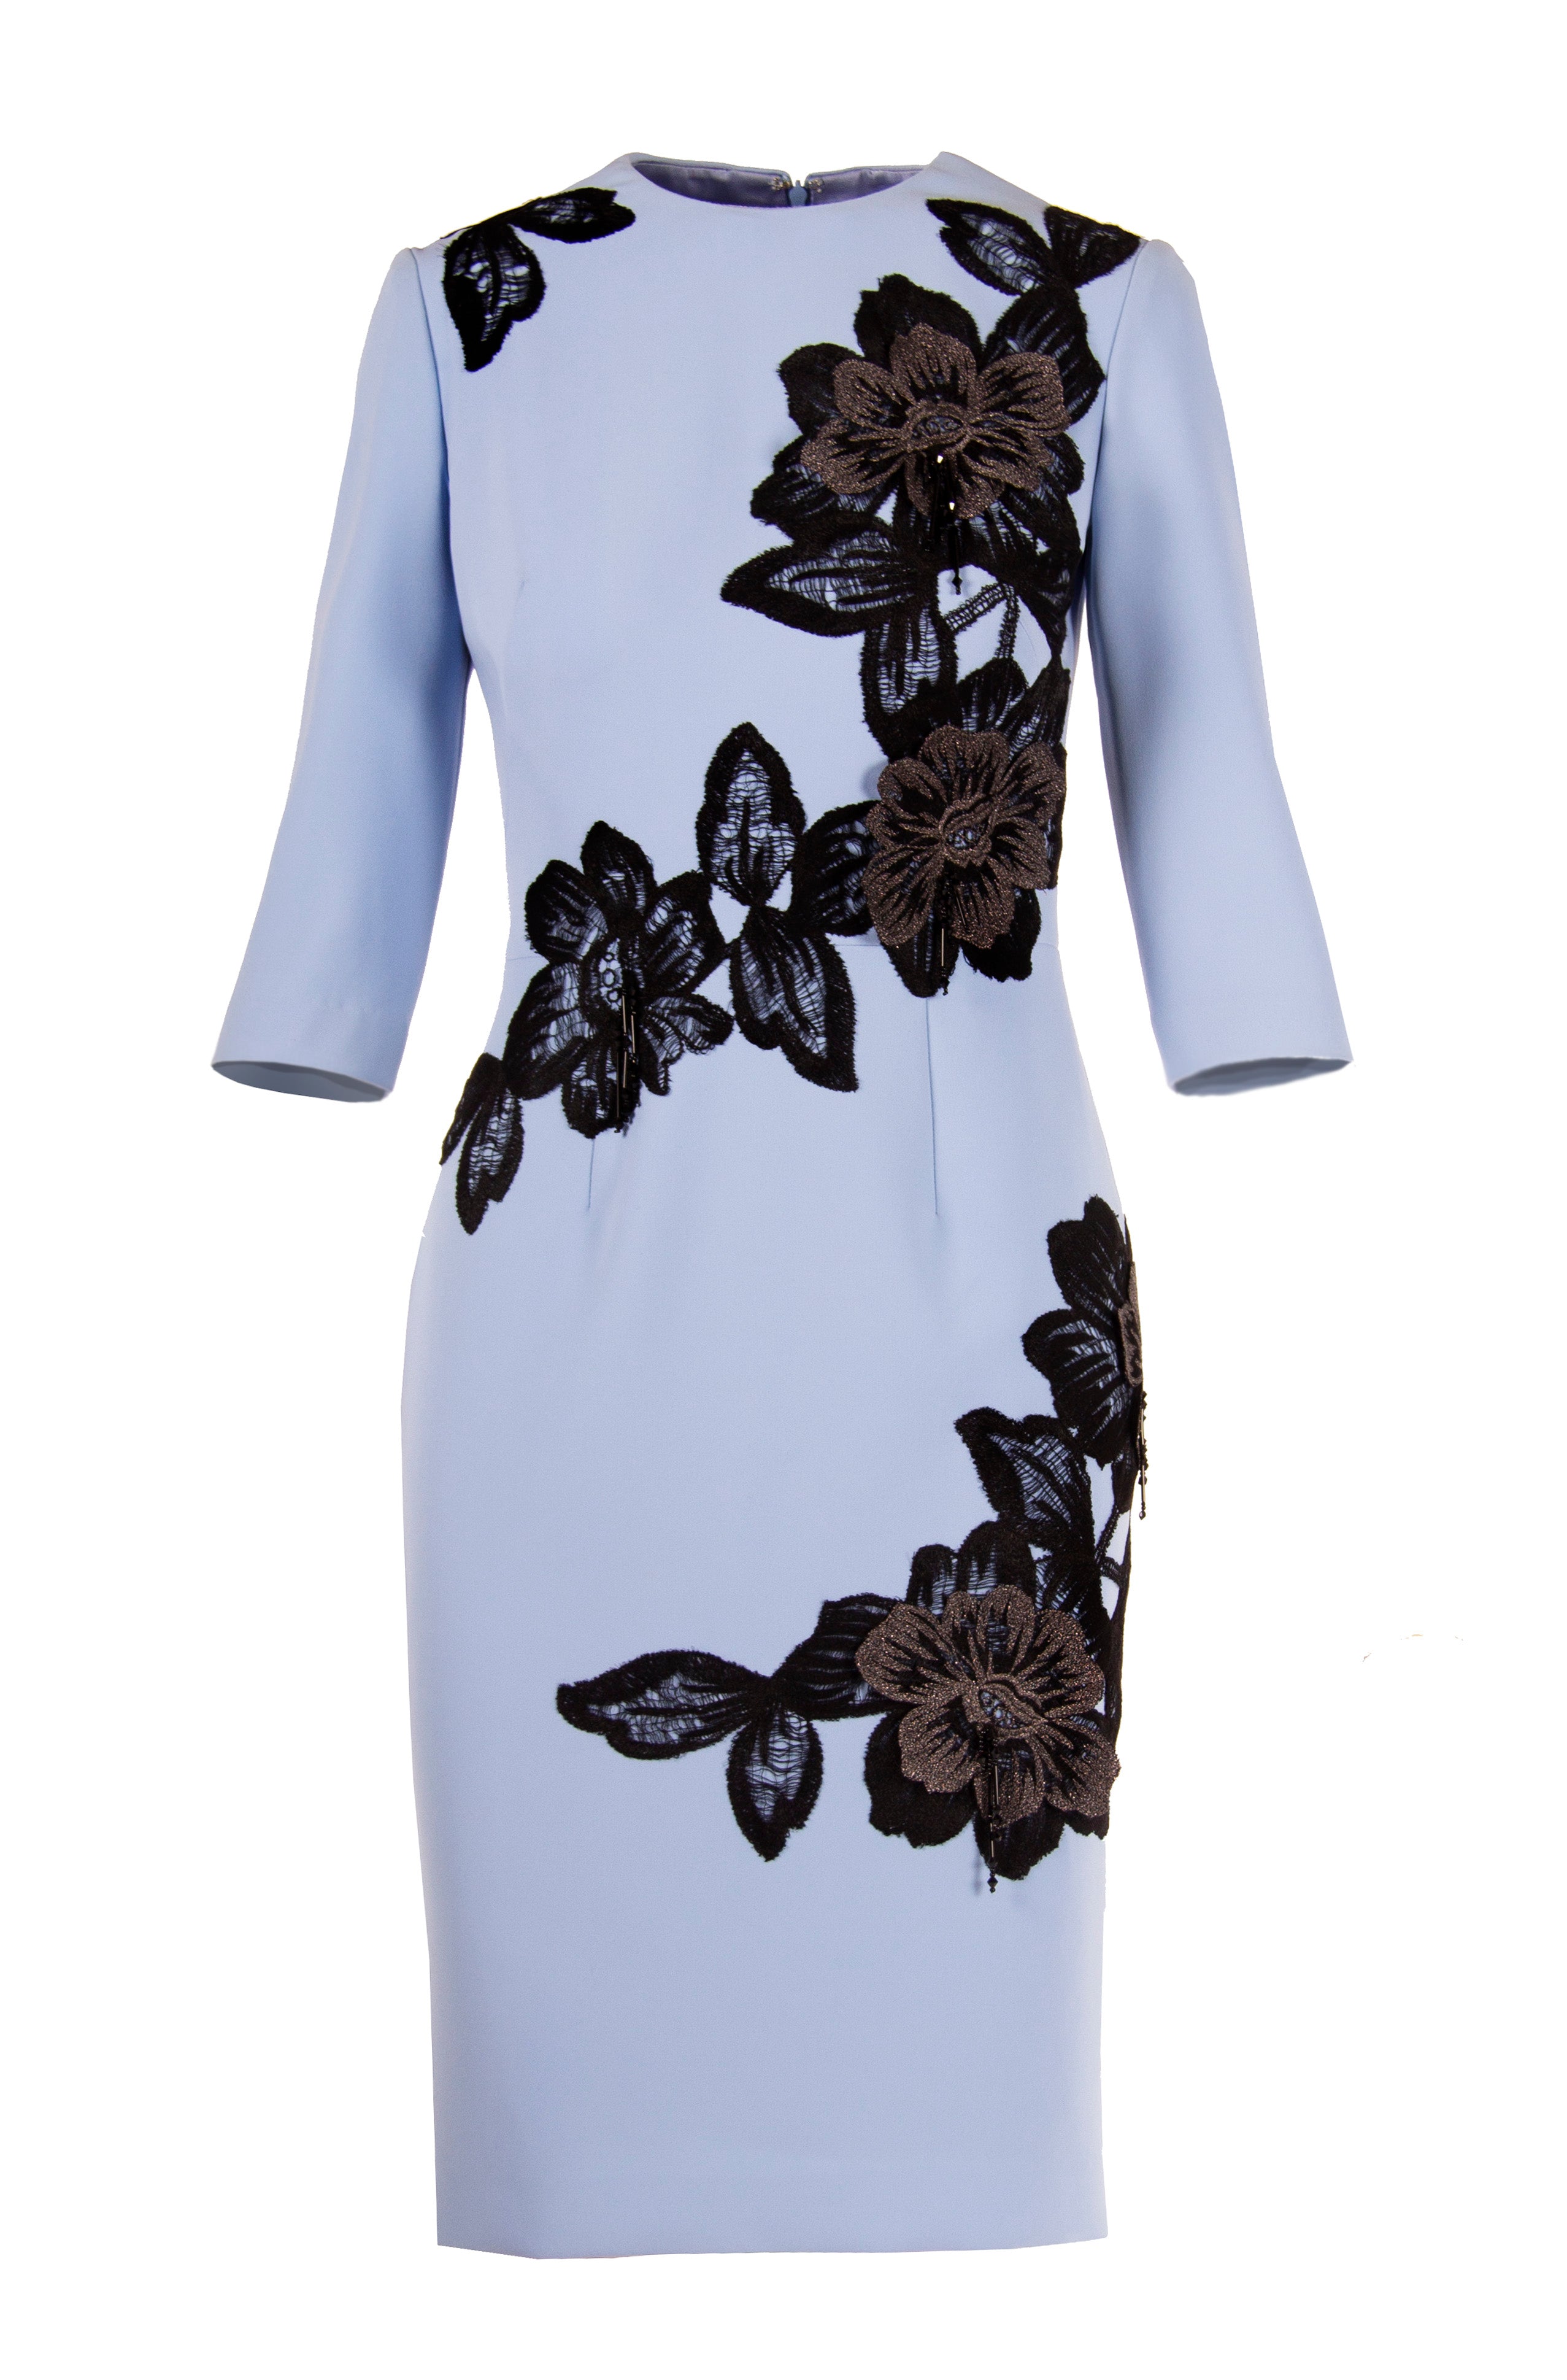 CREPE DRESS WITH BEADED FLORAL APPLIQUES – Lucian Matis